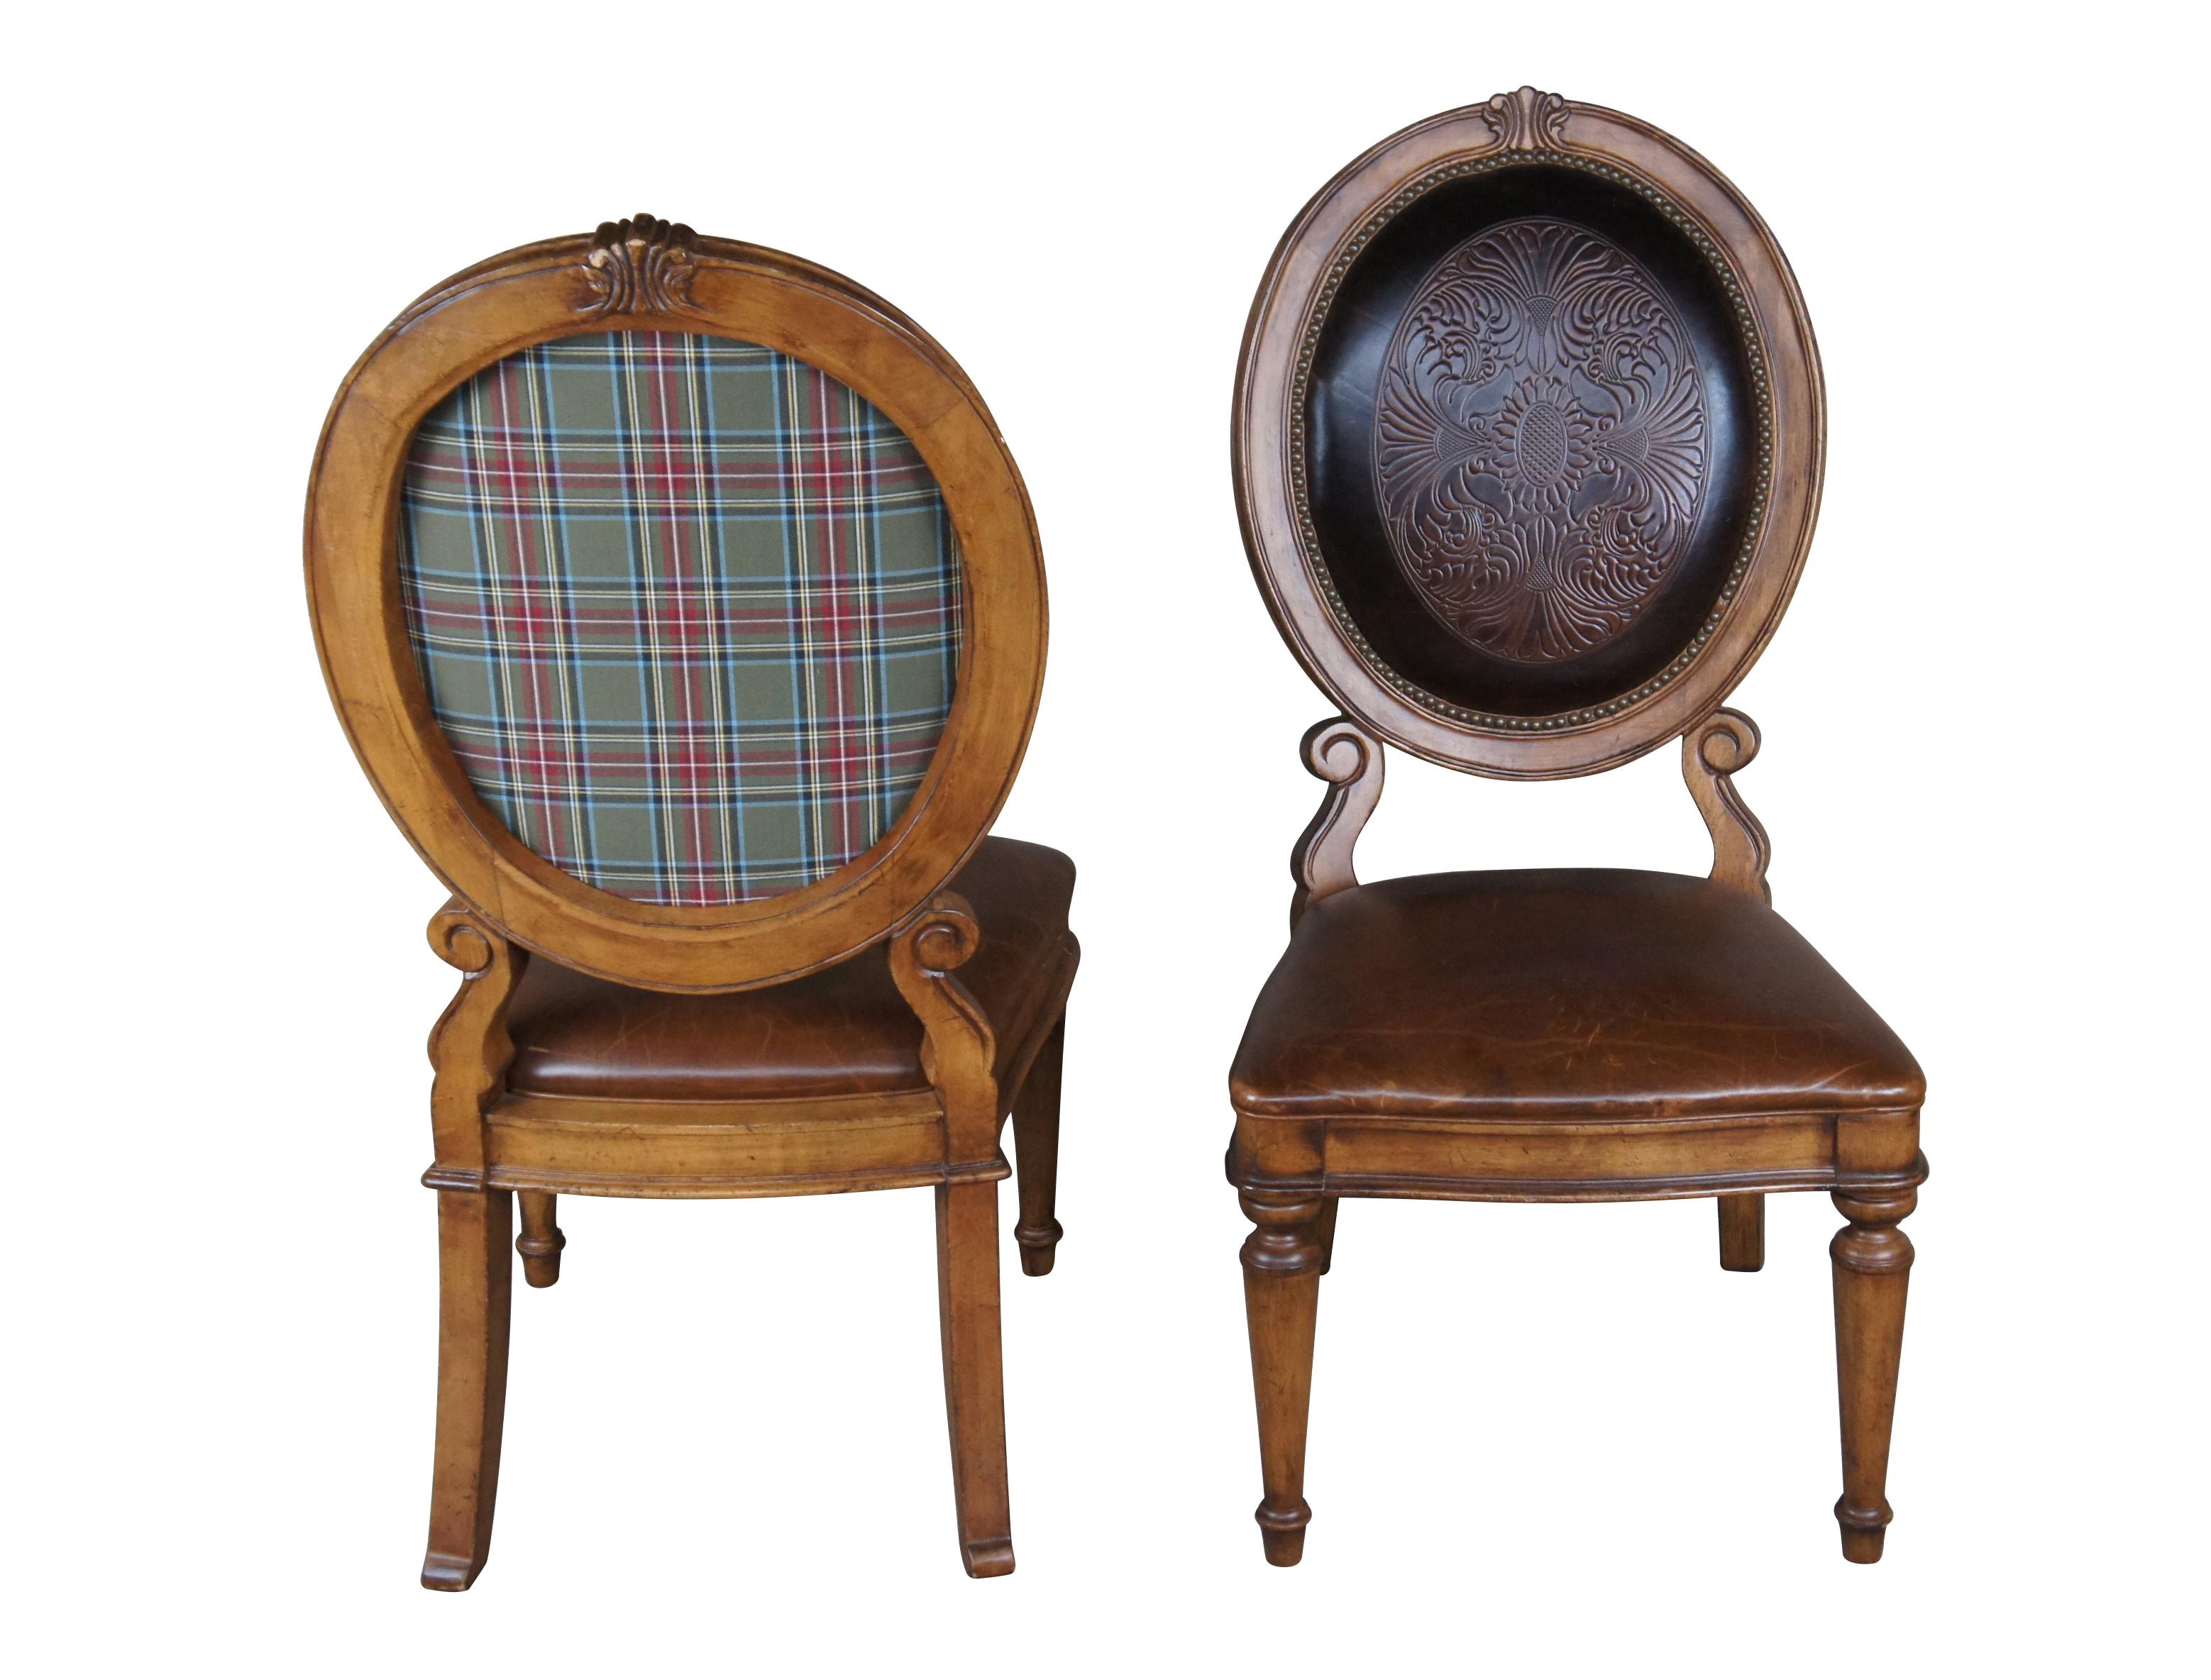 Vintage set of ten Tuscan Old World style oval back dining chairs.  Featuring tooled leather nailhead back with scrolled supports, leather seat, and plaid upholstered back.  The chairs are supported by turned and tapered front feet and spade feet